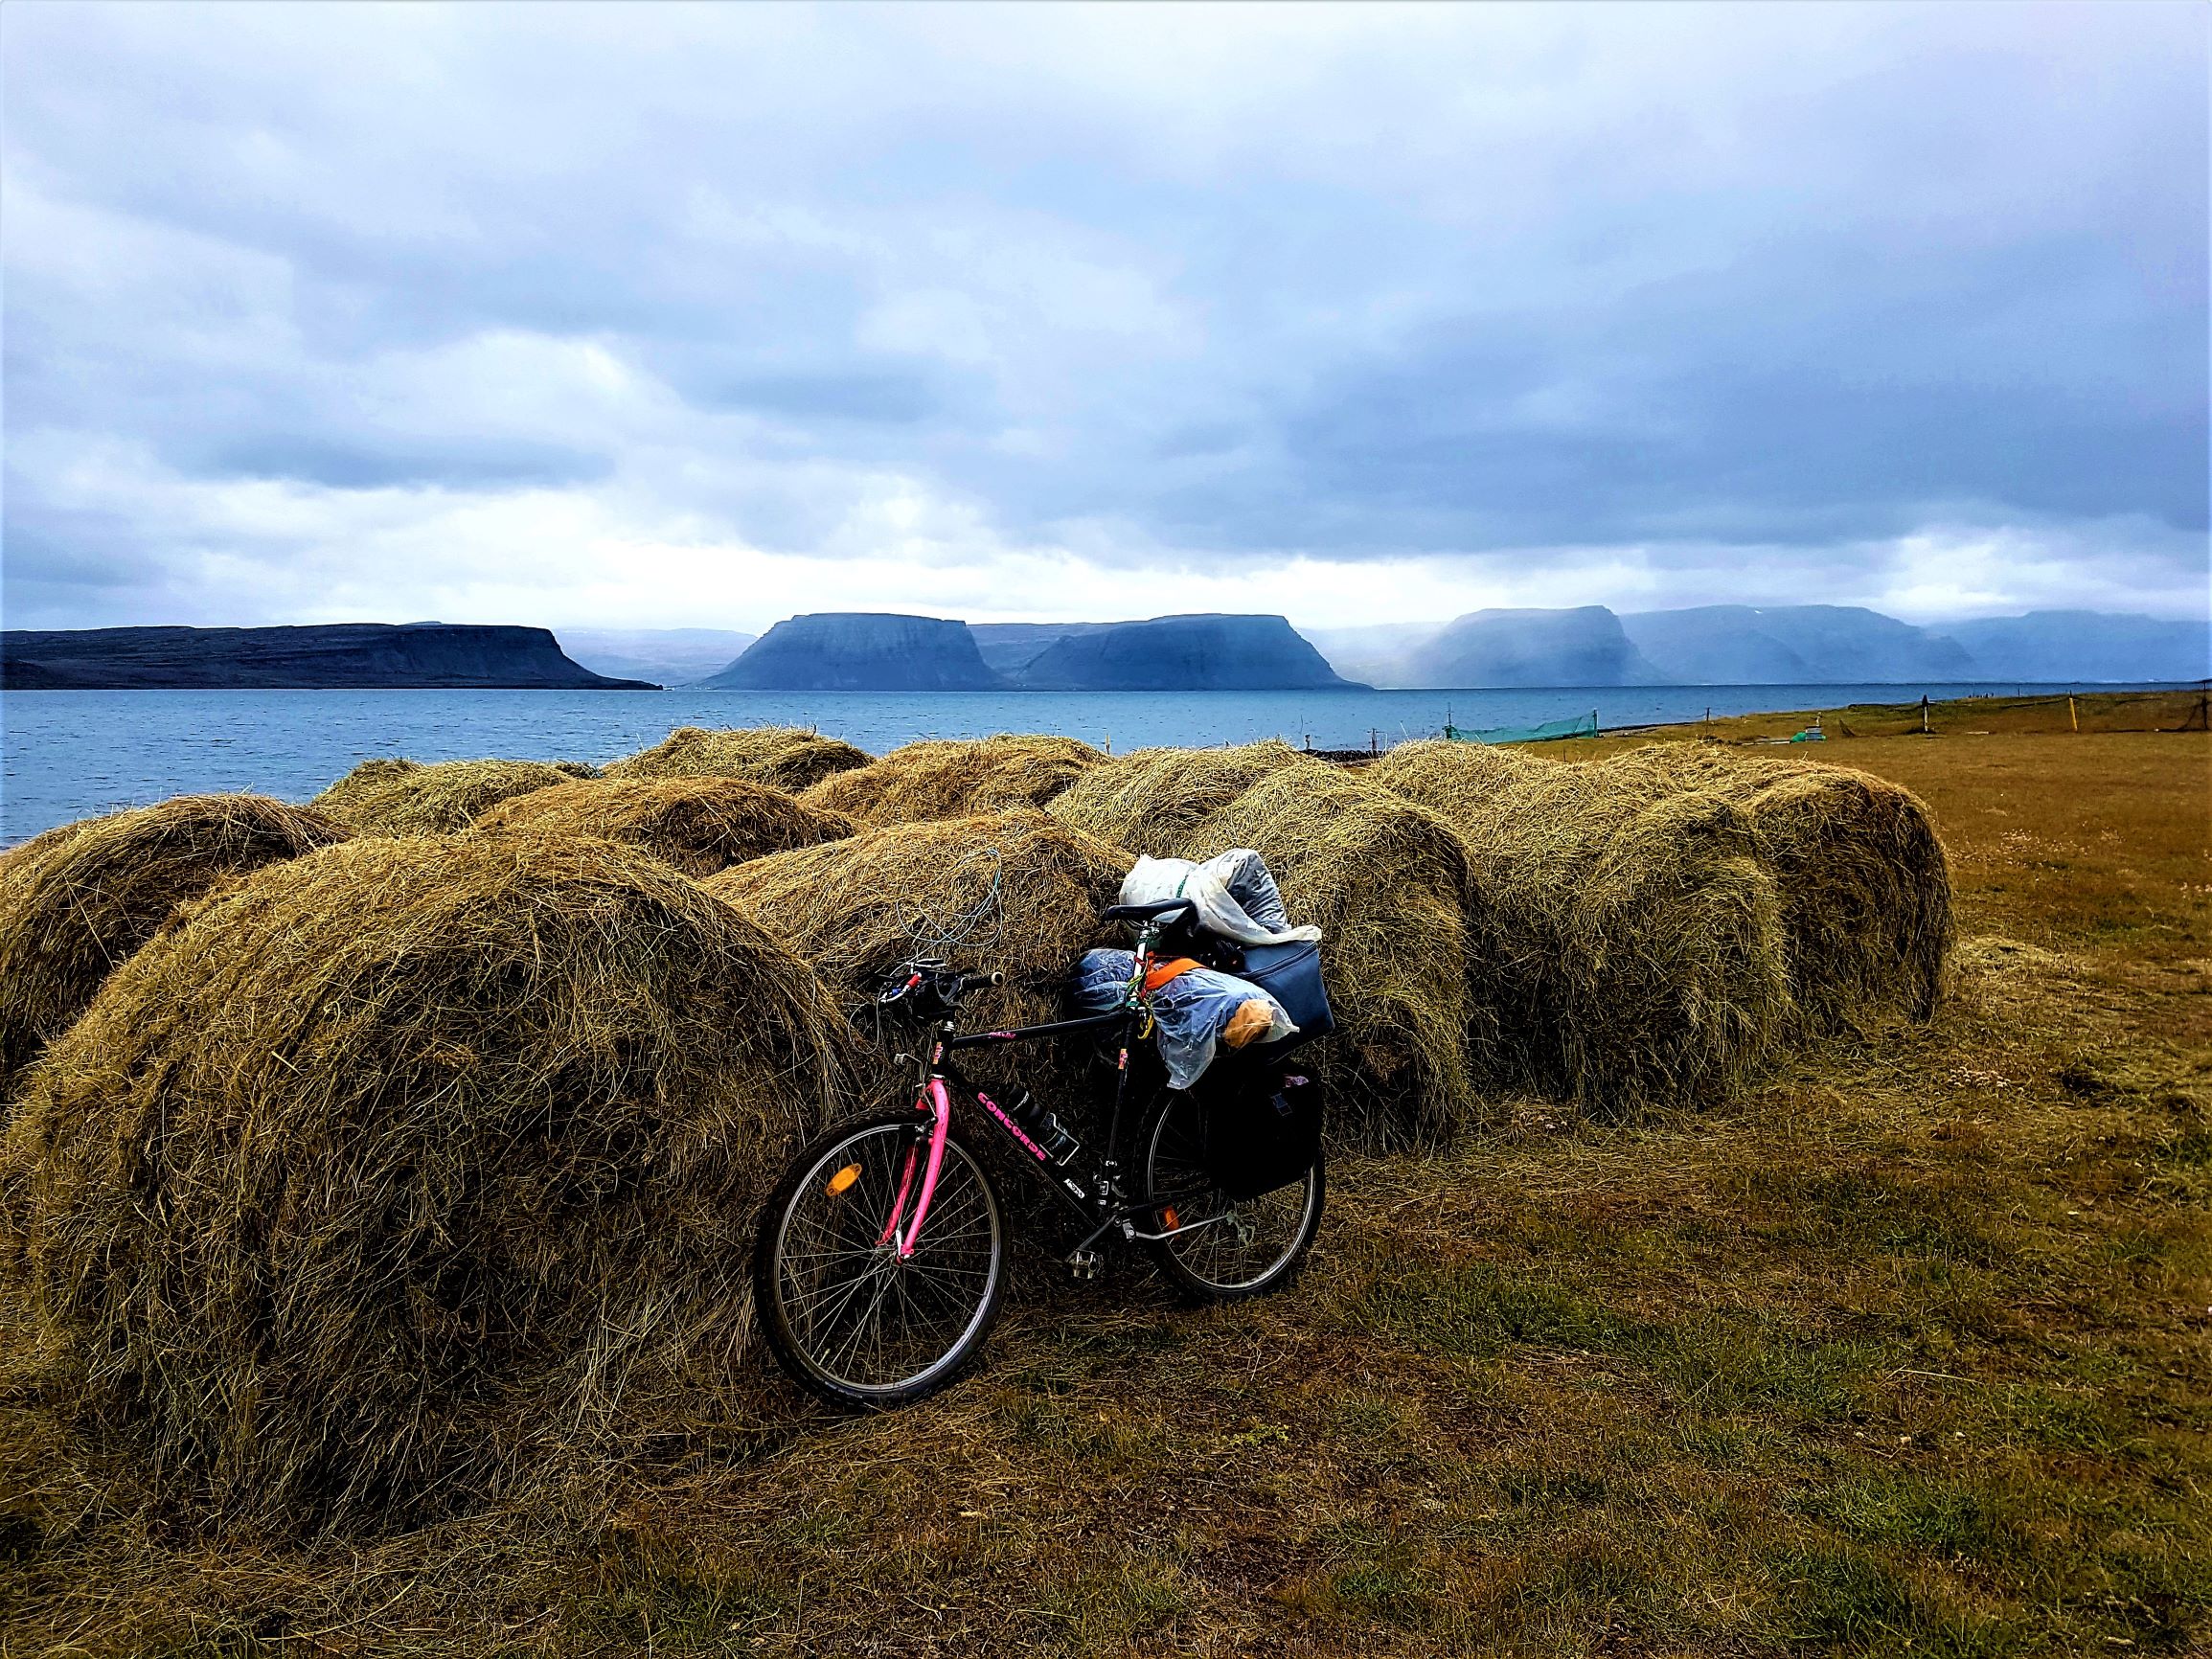 A bike with bags on the back leaning against a hay bale with a view of the Westfjords of Iceland in the background